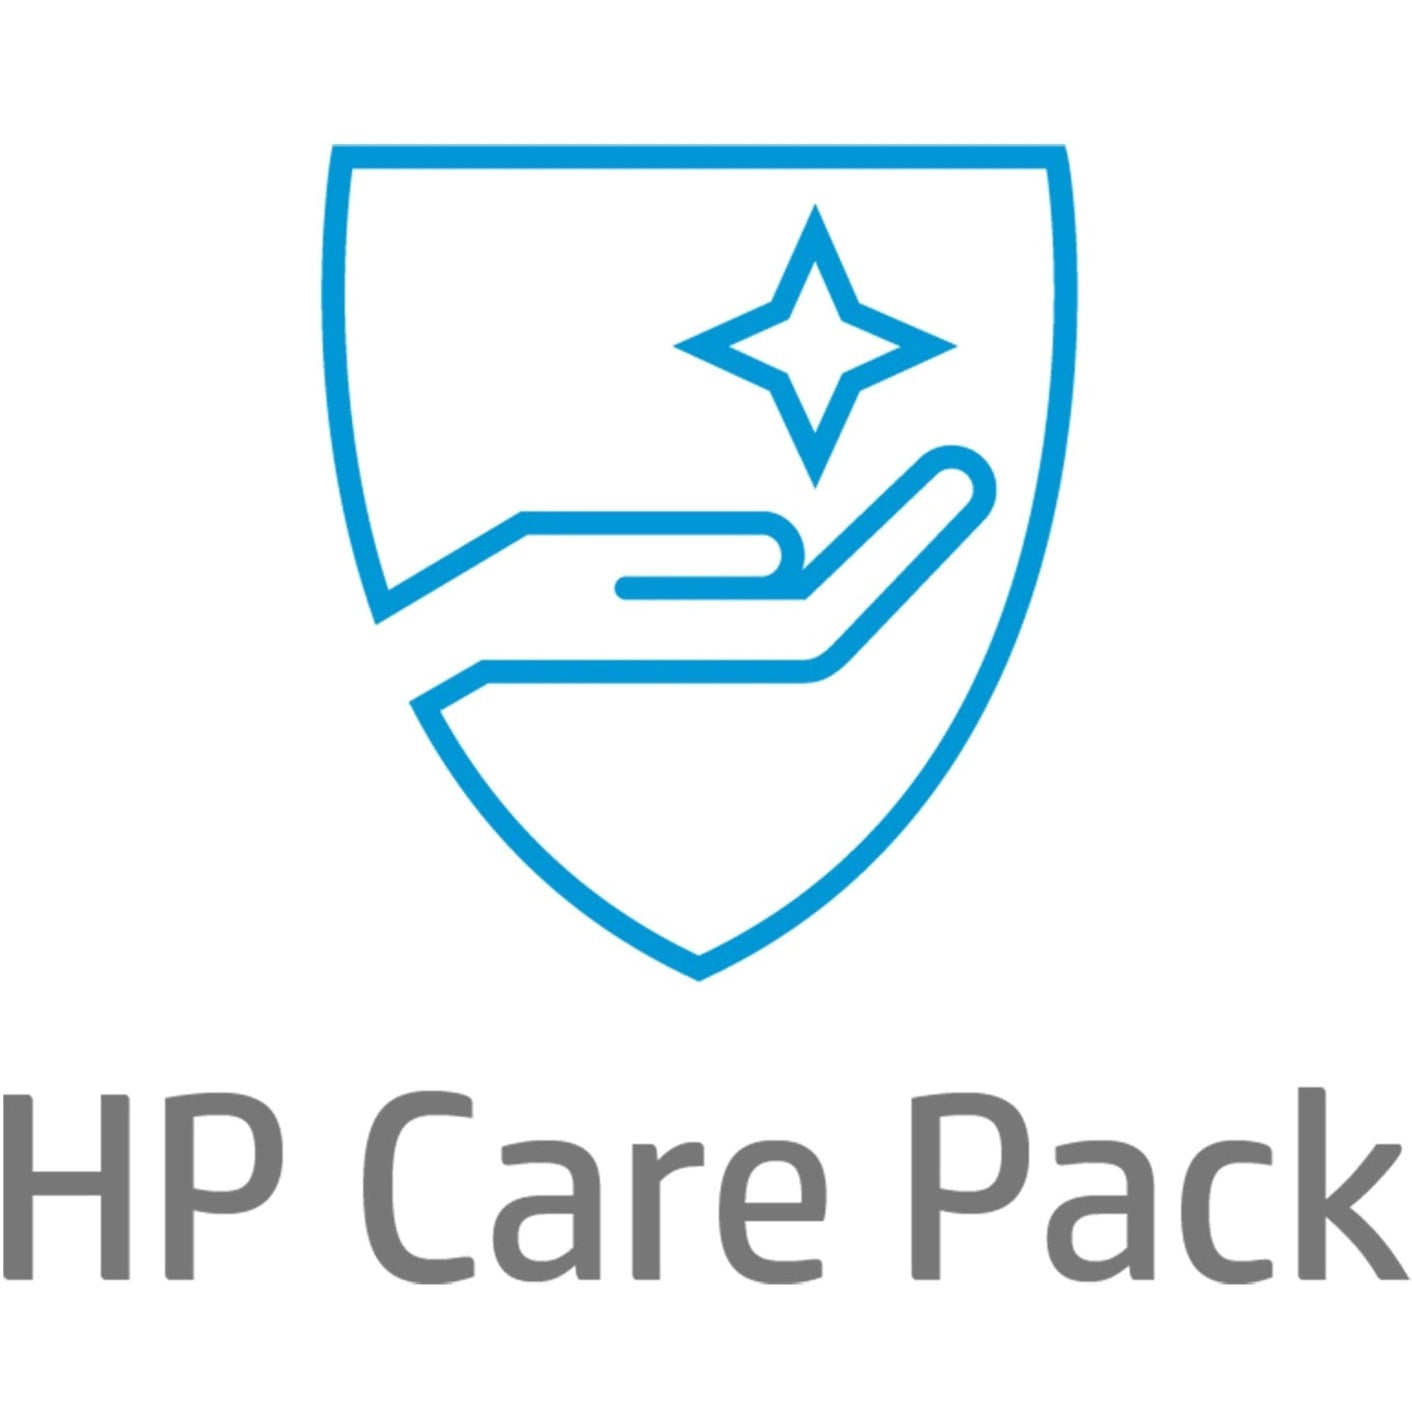 HP Care Pack Hardware Support On-site with Accidental damage protection - Extended Warranty - 3 Year - Warranty (U9BA9E)